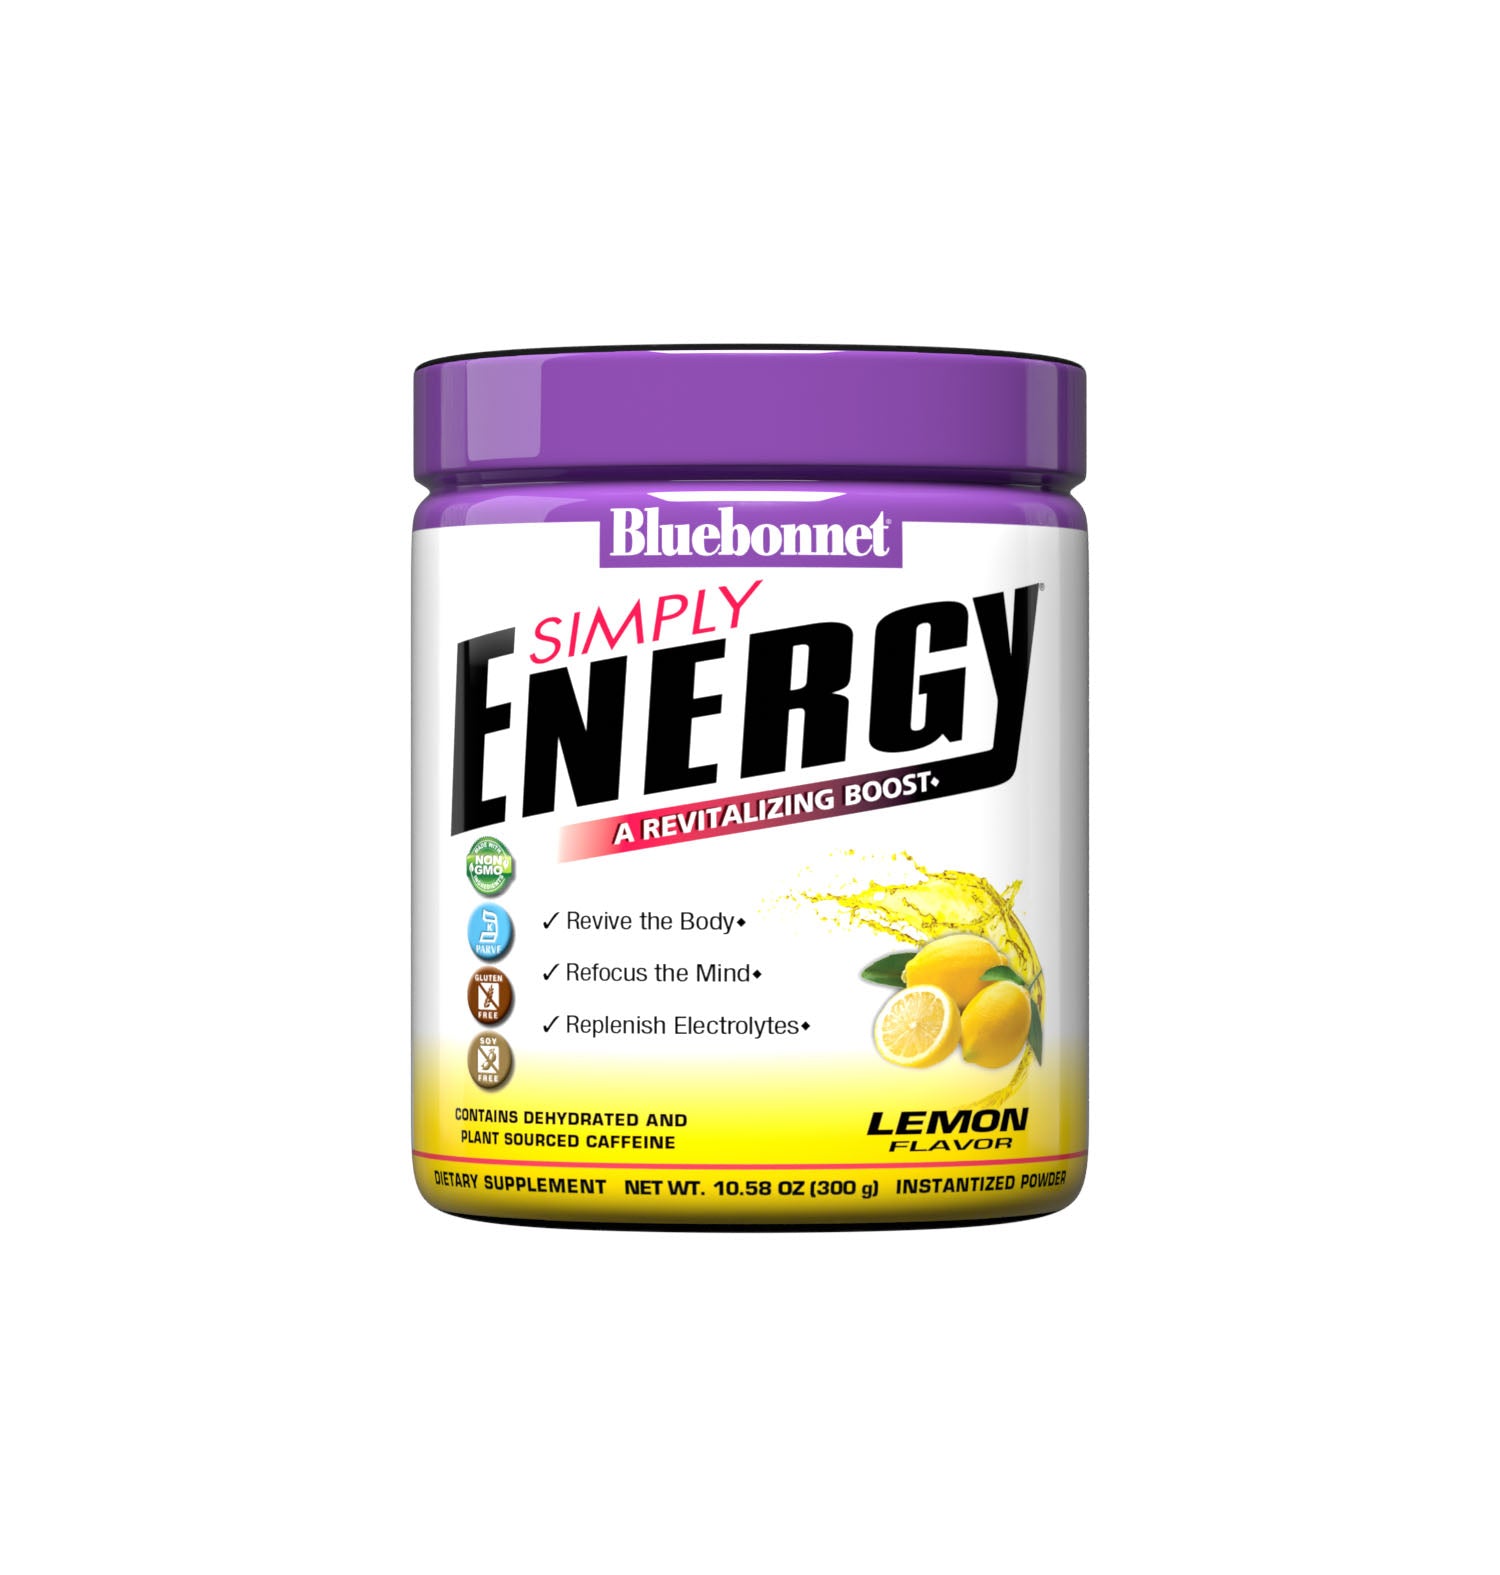 Simply Energy Powder is derived from a blend of herbal extracts, amino acids and electrolytes to help the body generate a wholesome surge of energy. The amino acids, L-arginine, L-citrulline and beta-alanine, have been incorporated to enhance blood flow, as well as theanine to help the mind reach optimal mental clarity. #size_10.58 oz